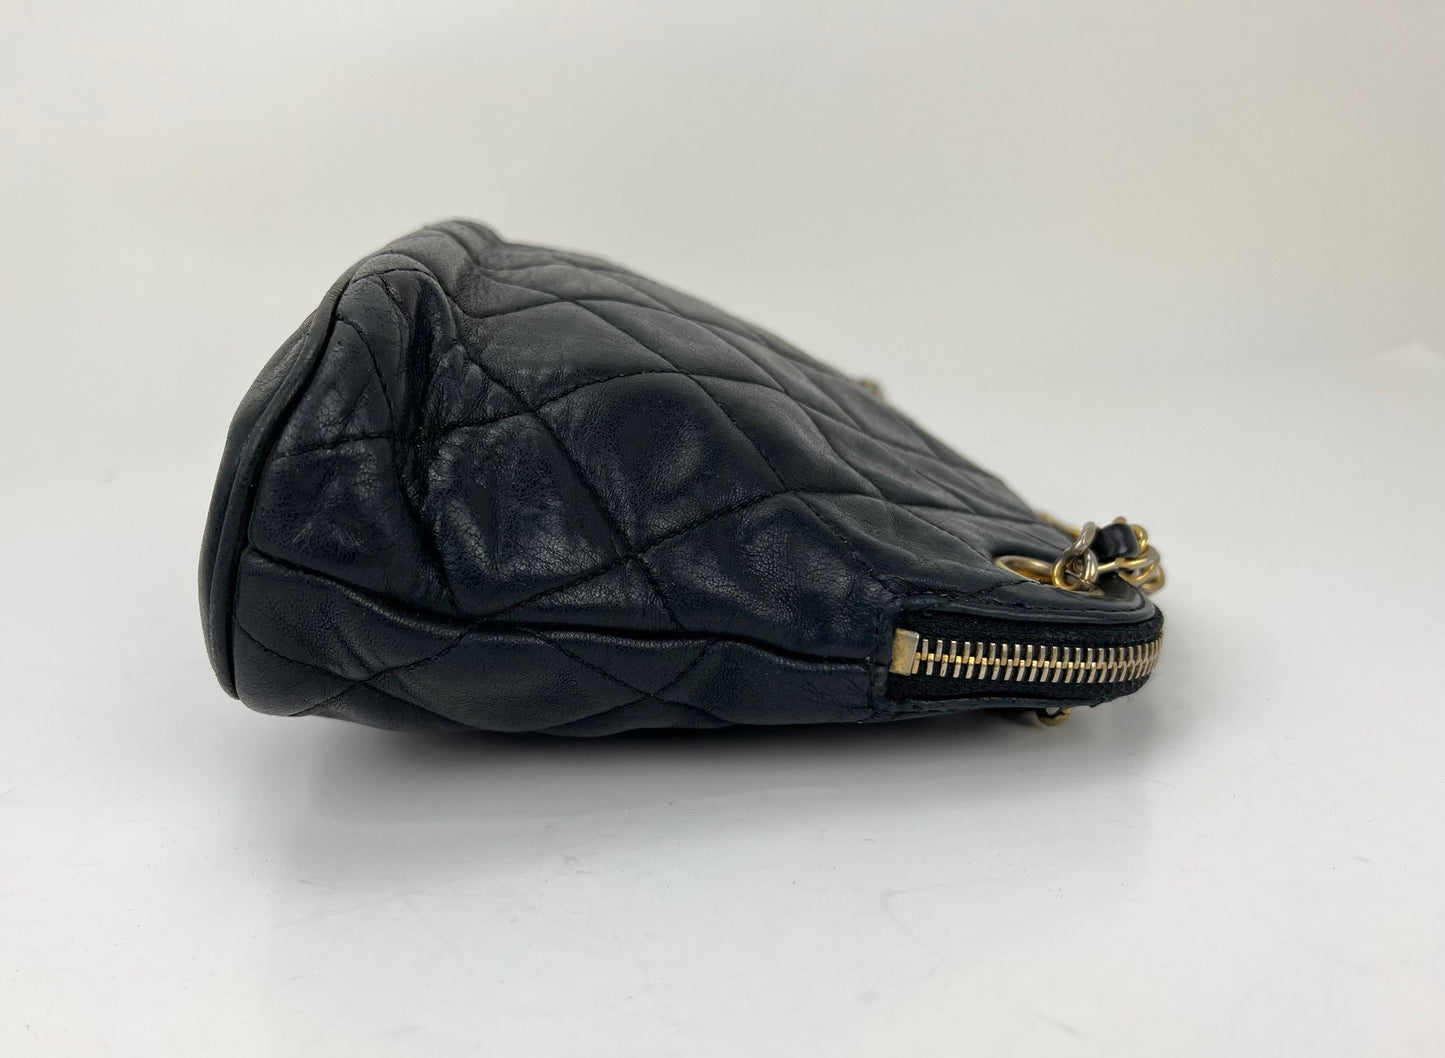 Chanel Trendy Small, Black Lambskin with Gold Hardware, Preowned in Box  WA001